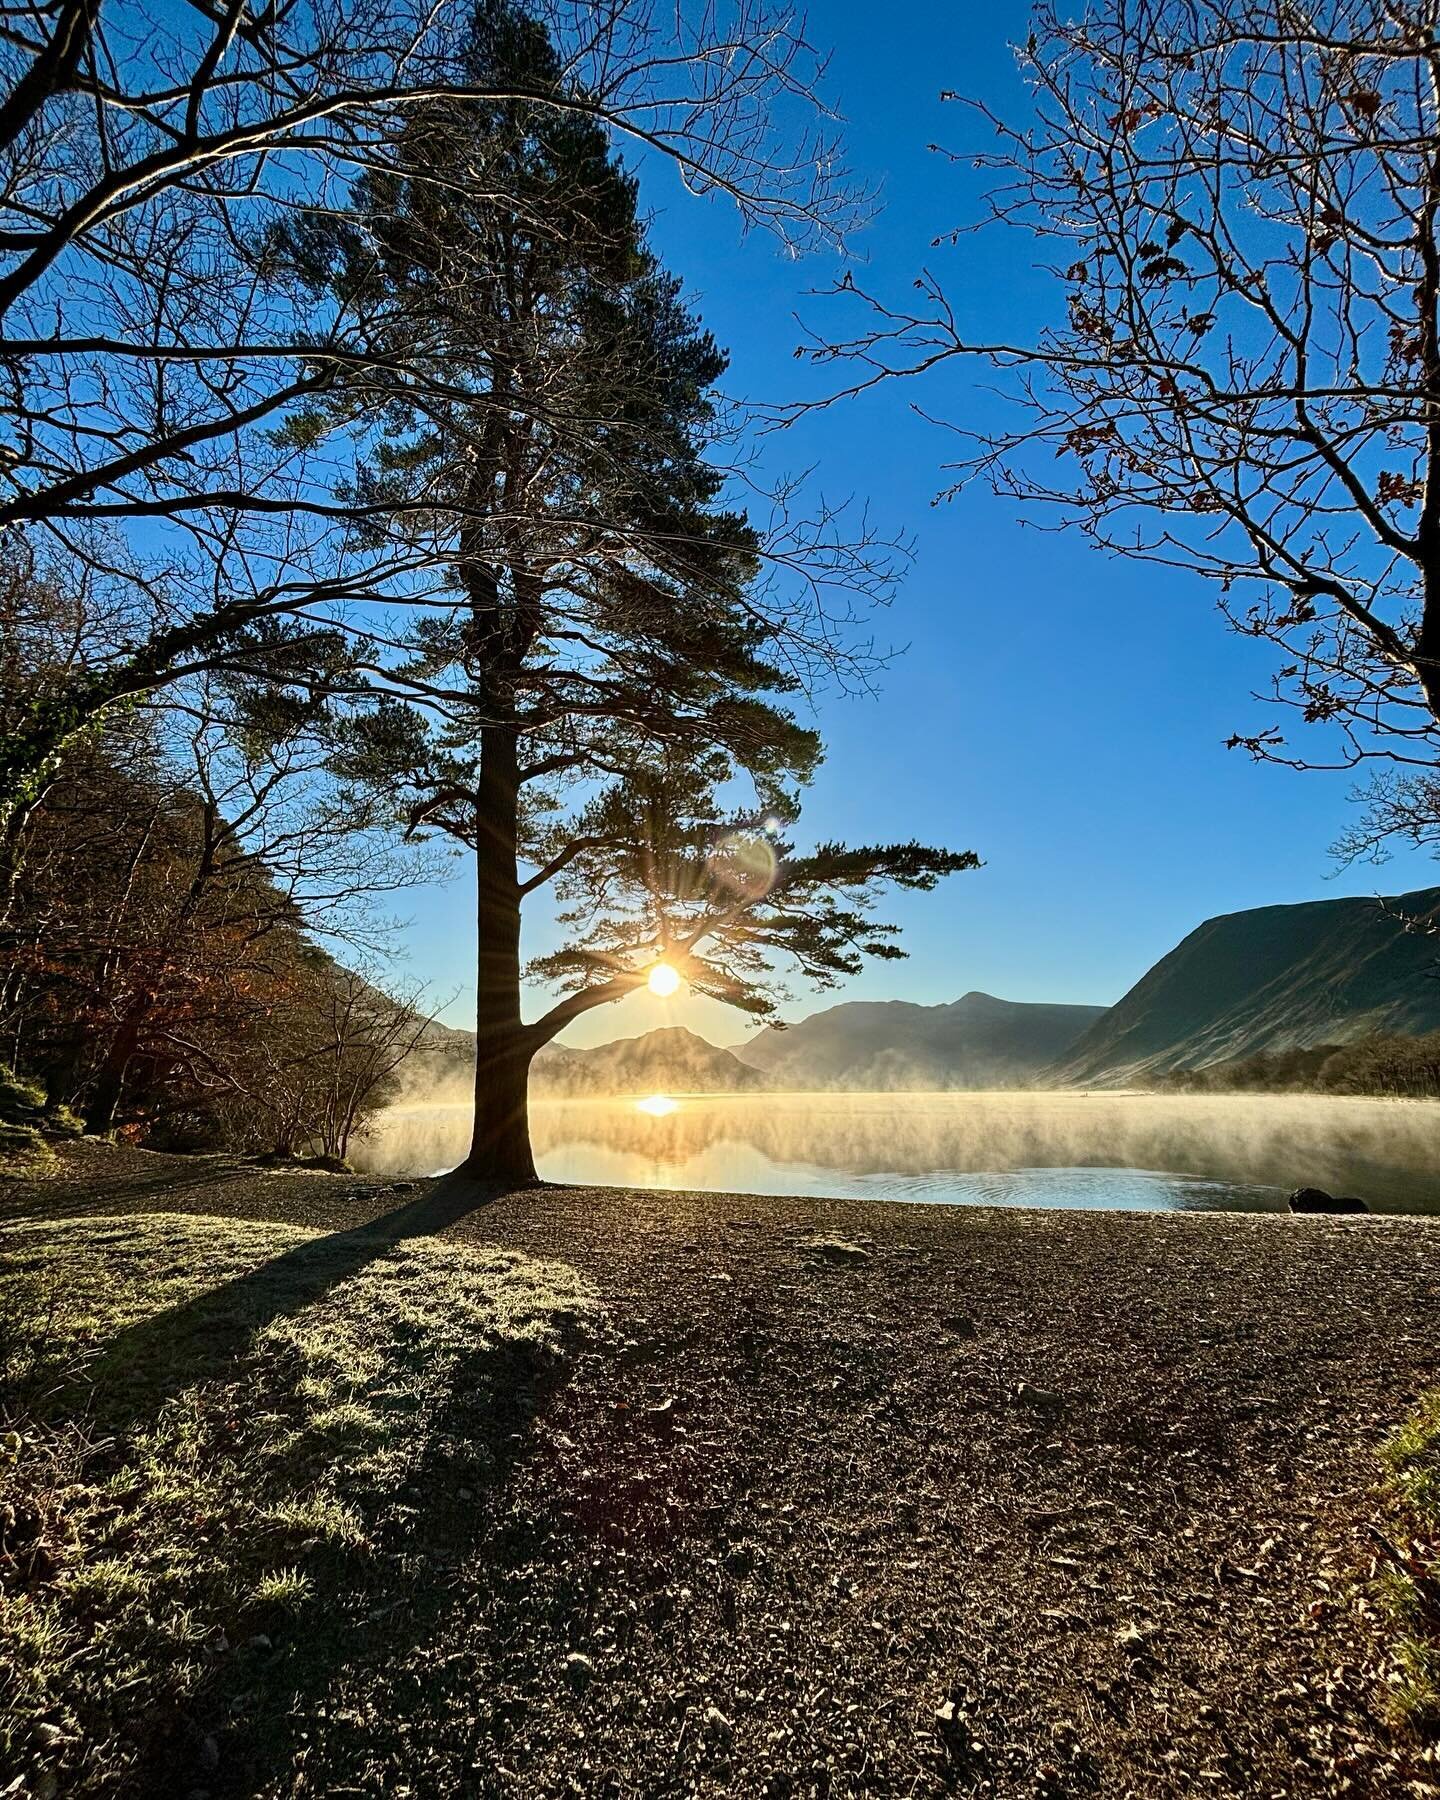 December 1st and what a morning at Crummock Water! 

#December #StepIntoChristmas #ScaleHill #Loweswater #smokeonthewater #crummock #crummockwater #lakedistrict #your_lakedistrict